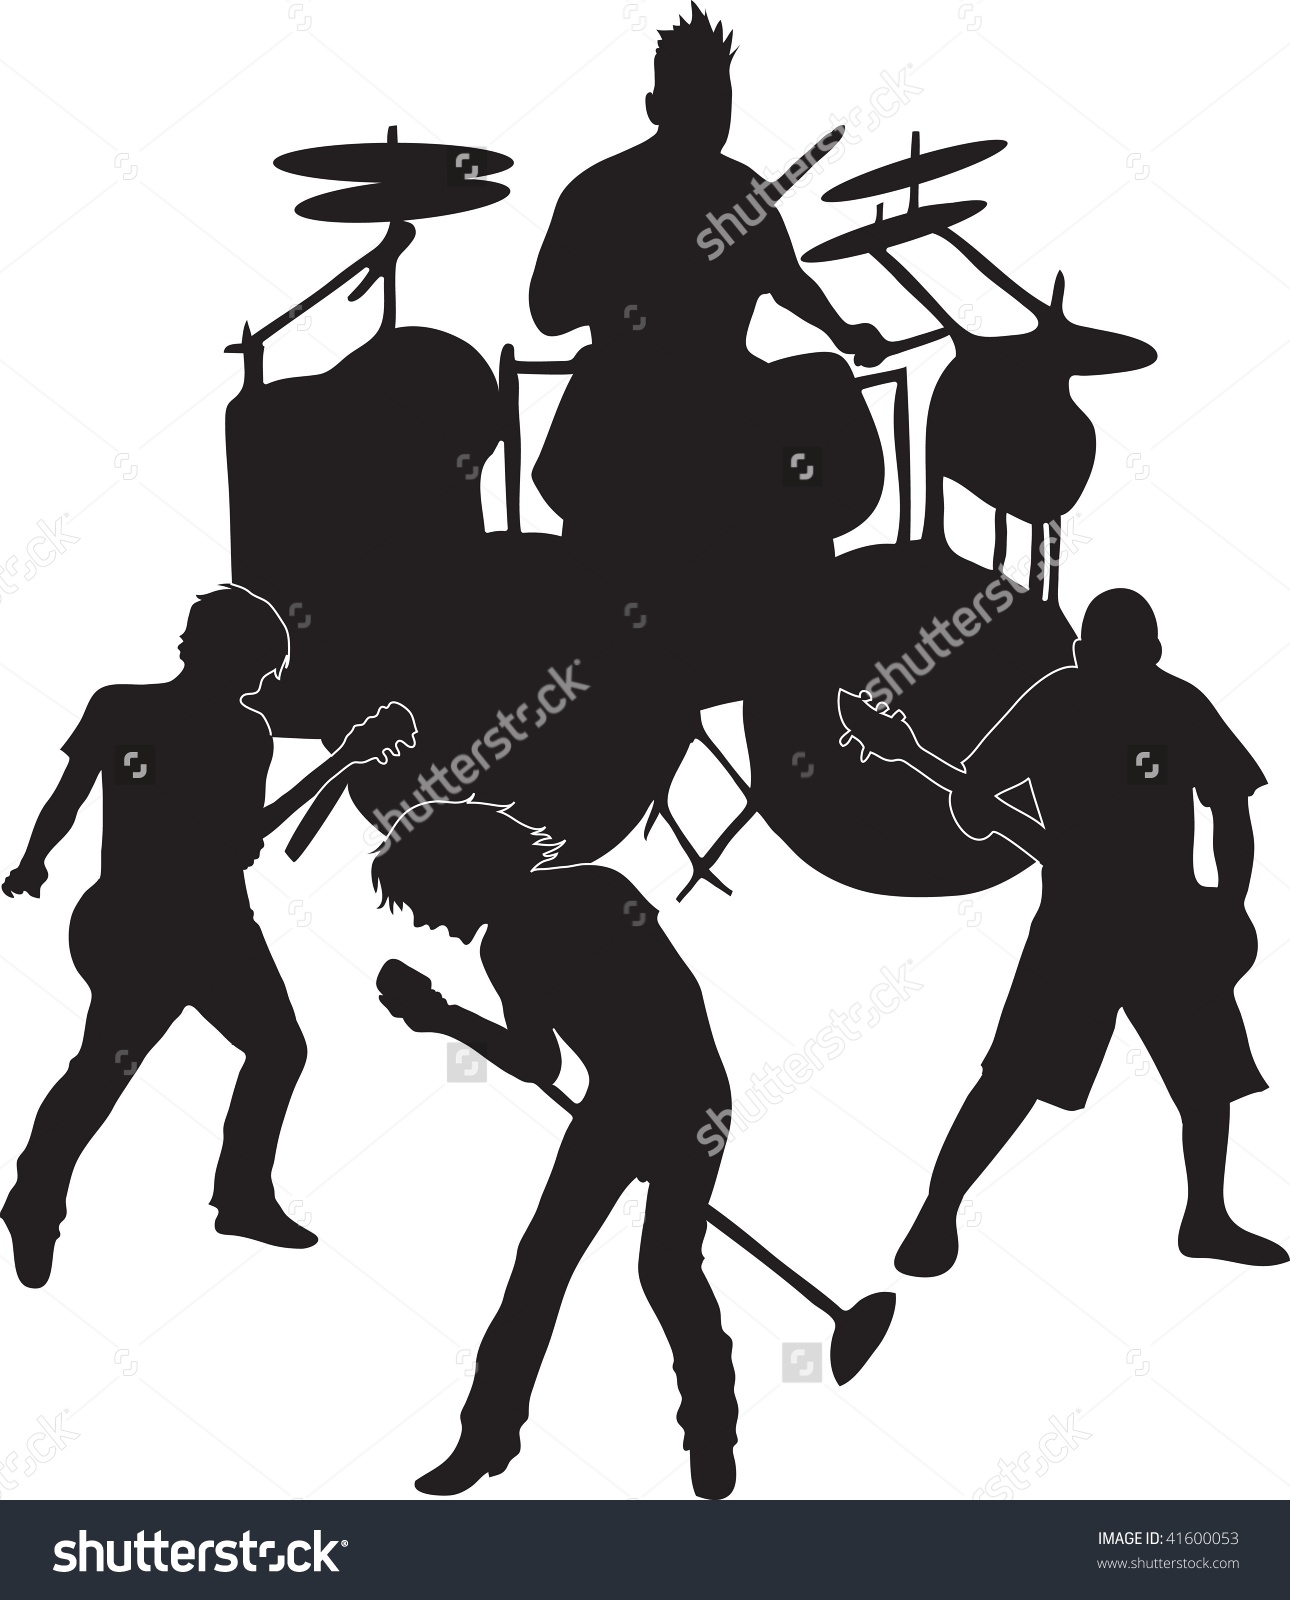 Band clipart - Clipground